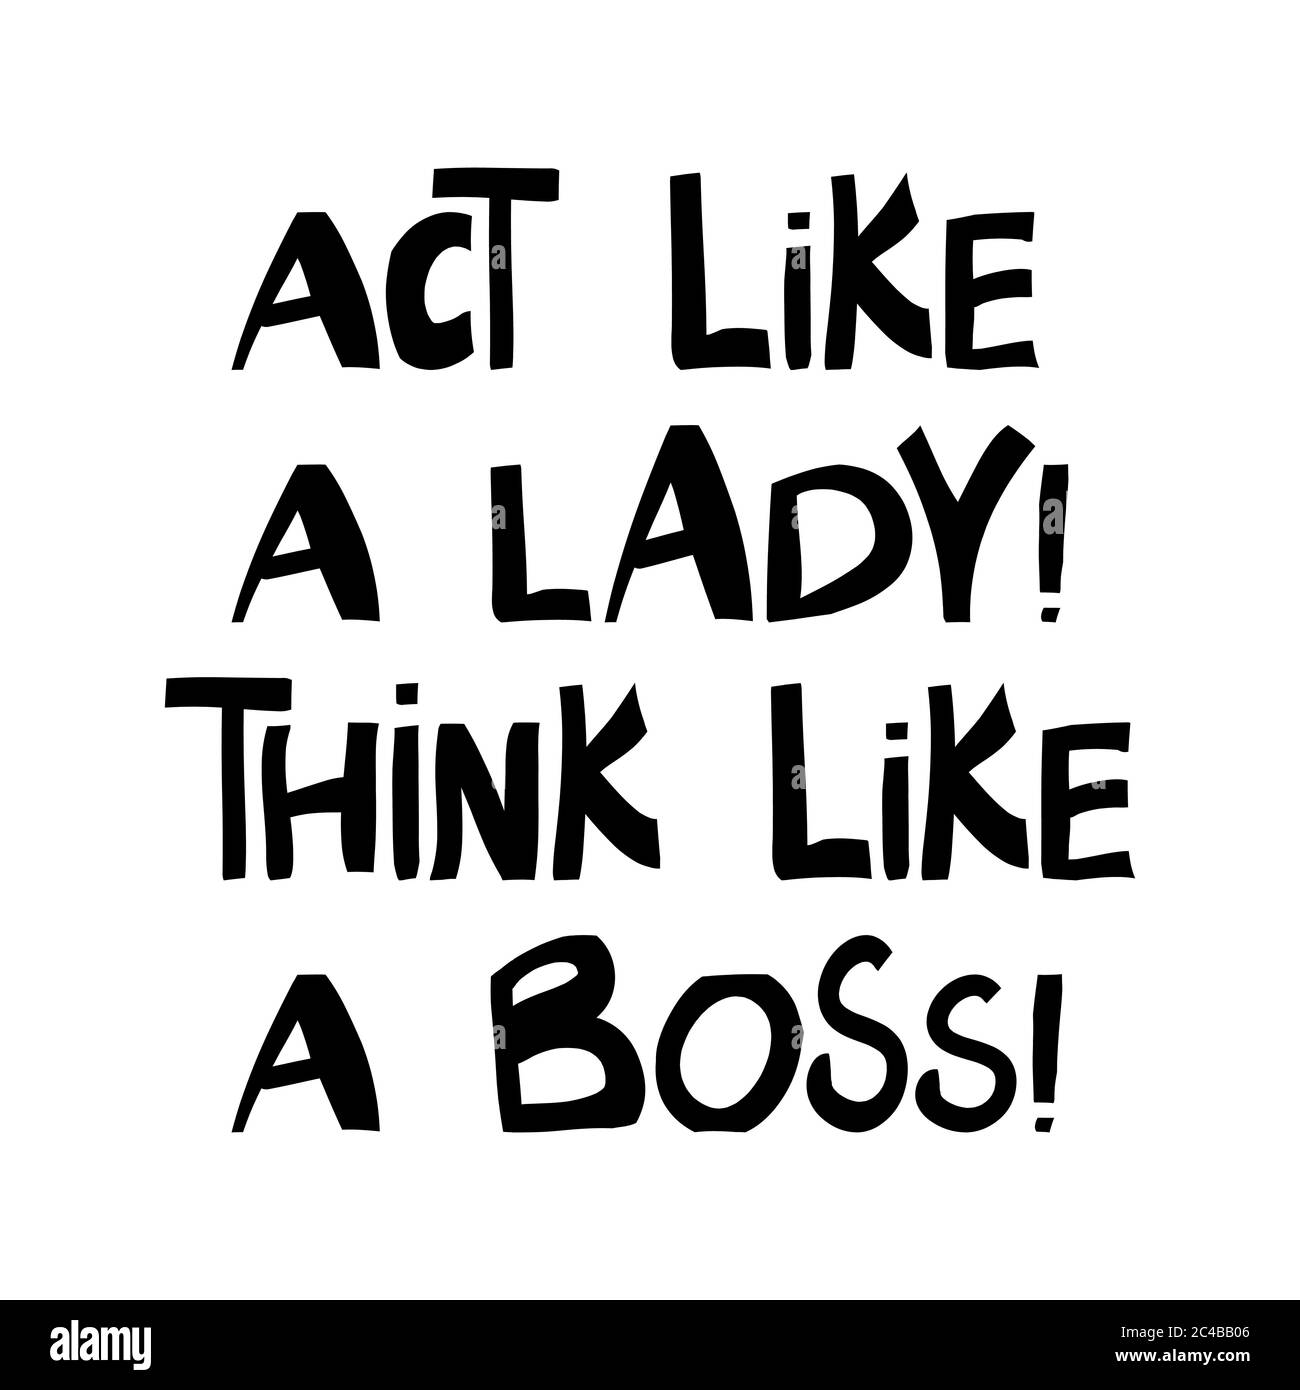 Lady boss Black and White Stock Photos & Images - Alamy